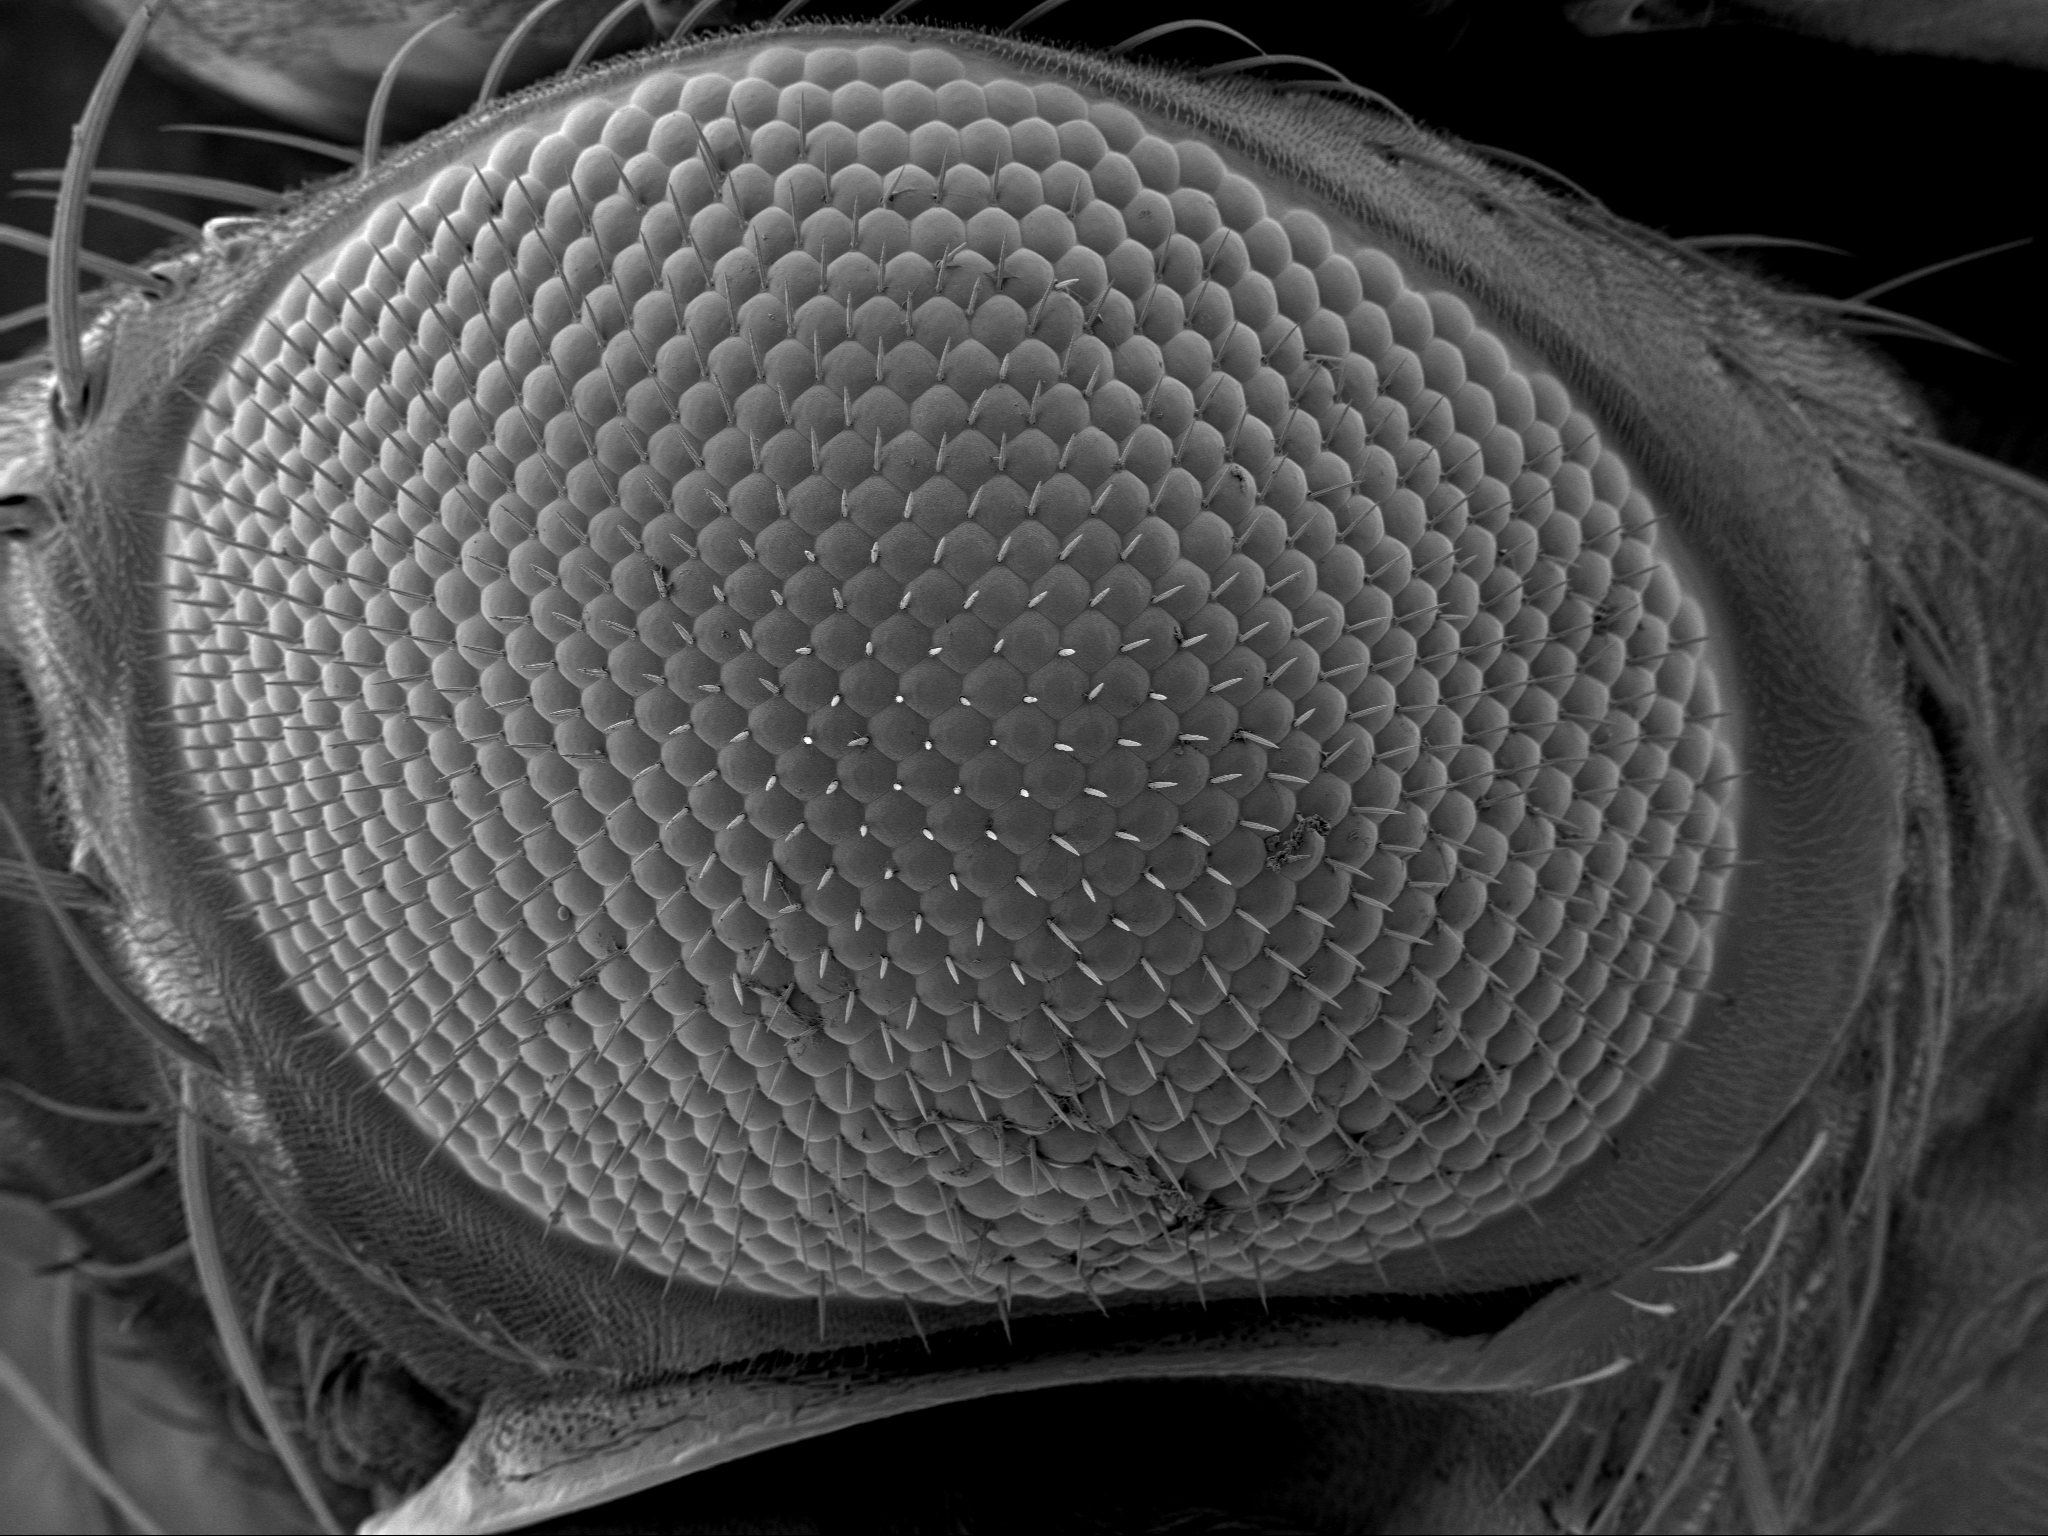 electron micrograph of a fly's eye